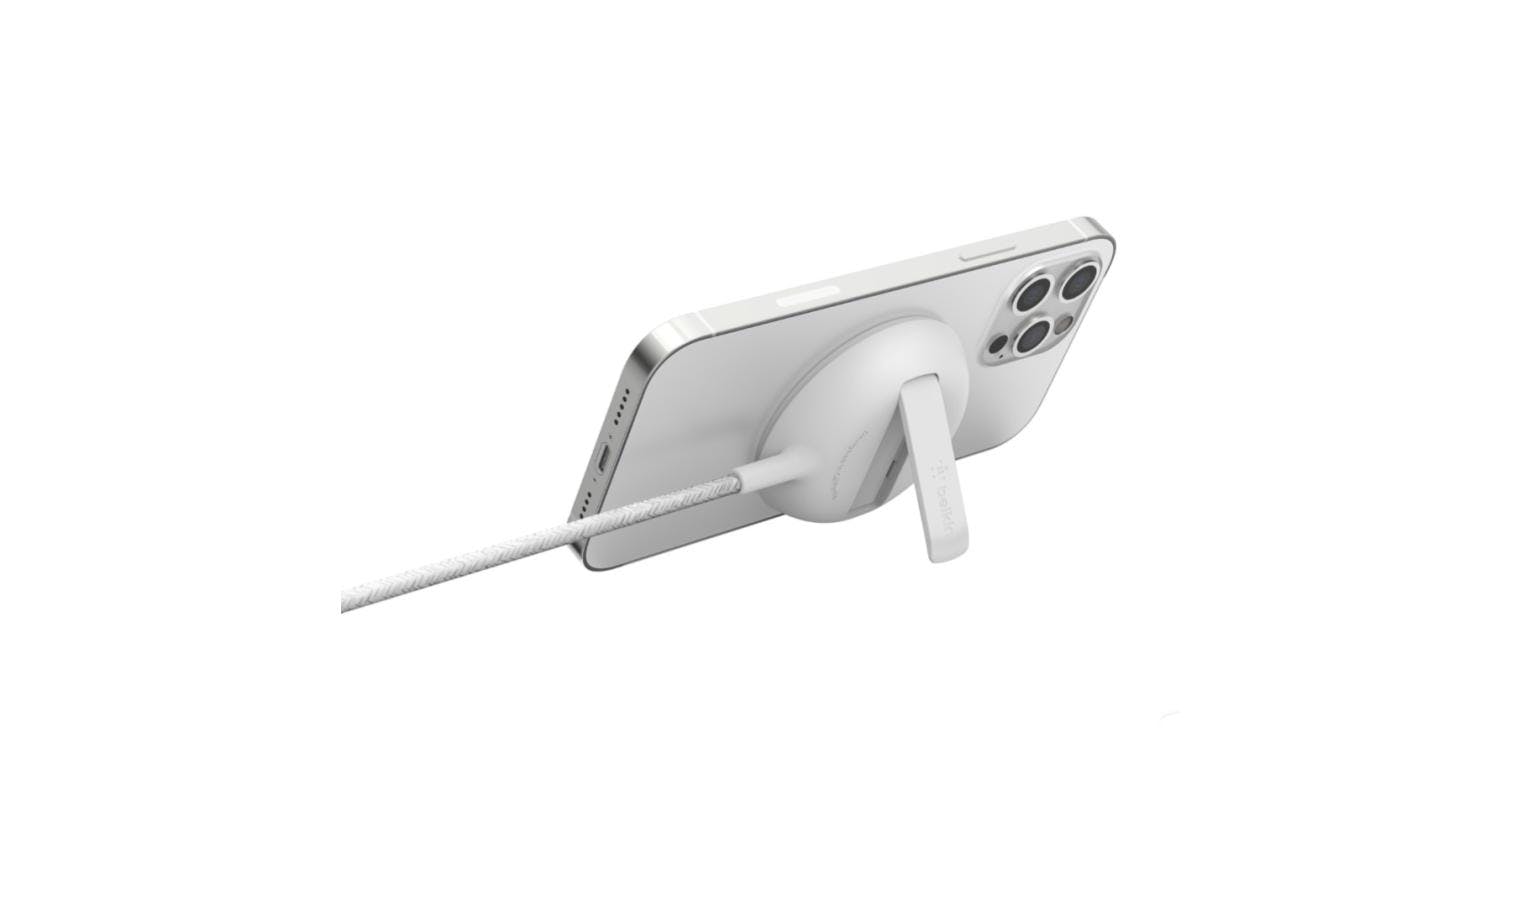 Belkin Shares Details on First MagSafe Accessories for iPhone 12